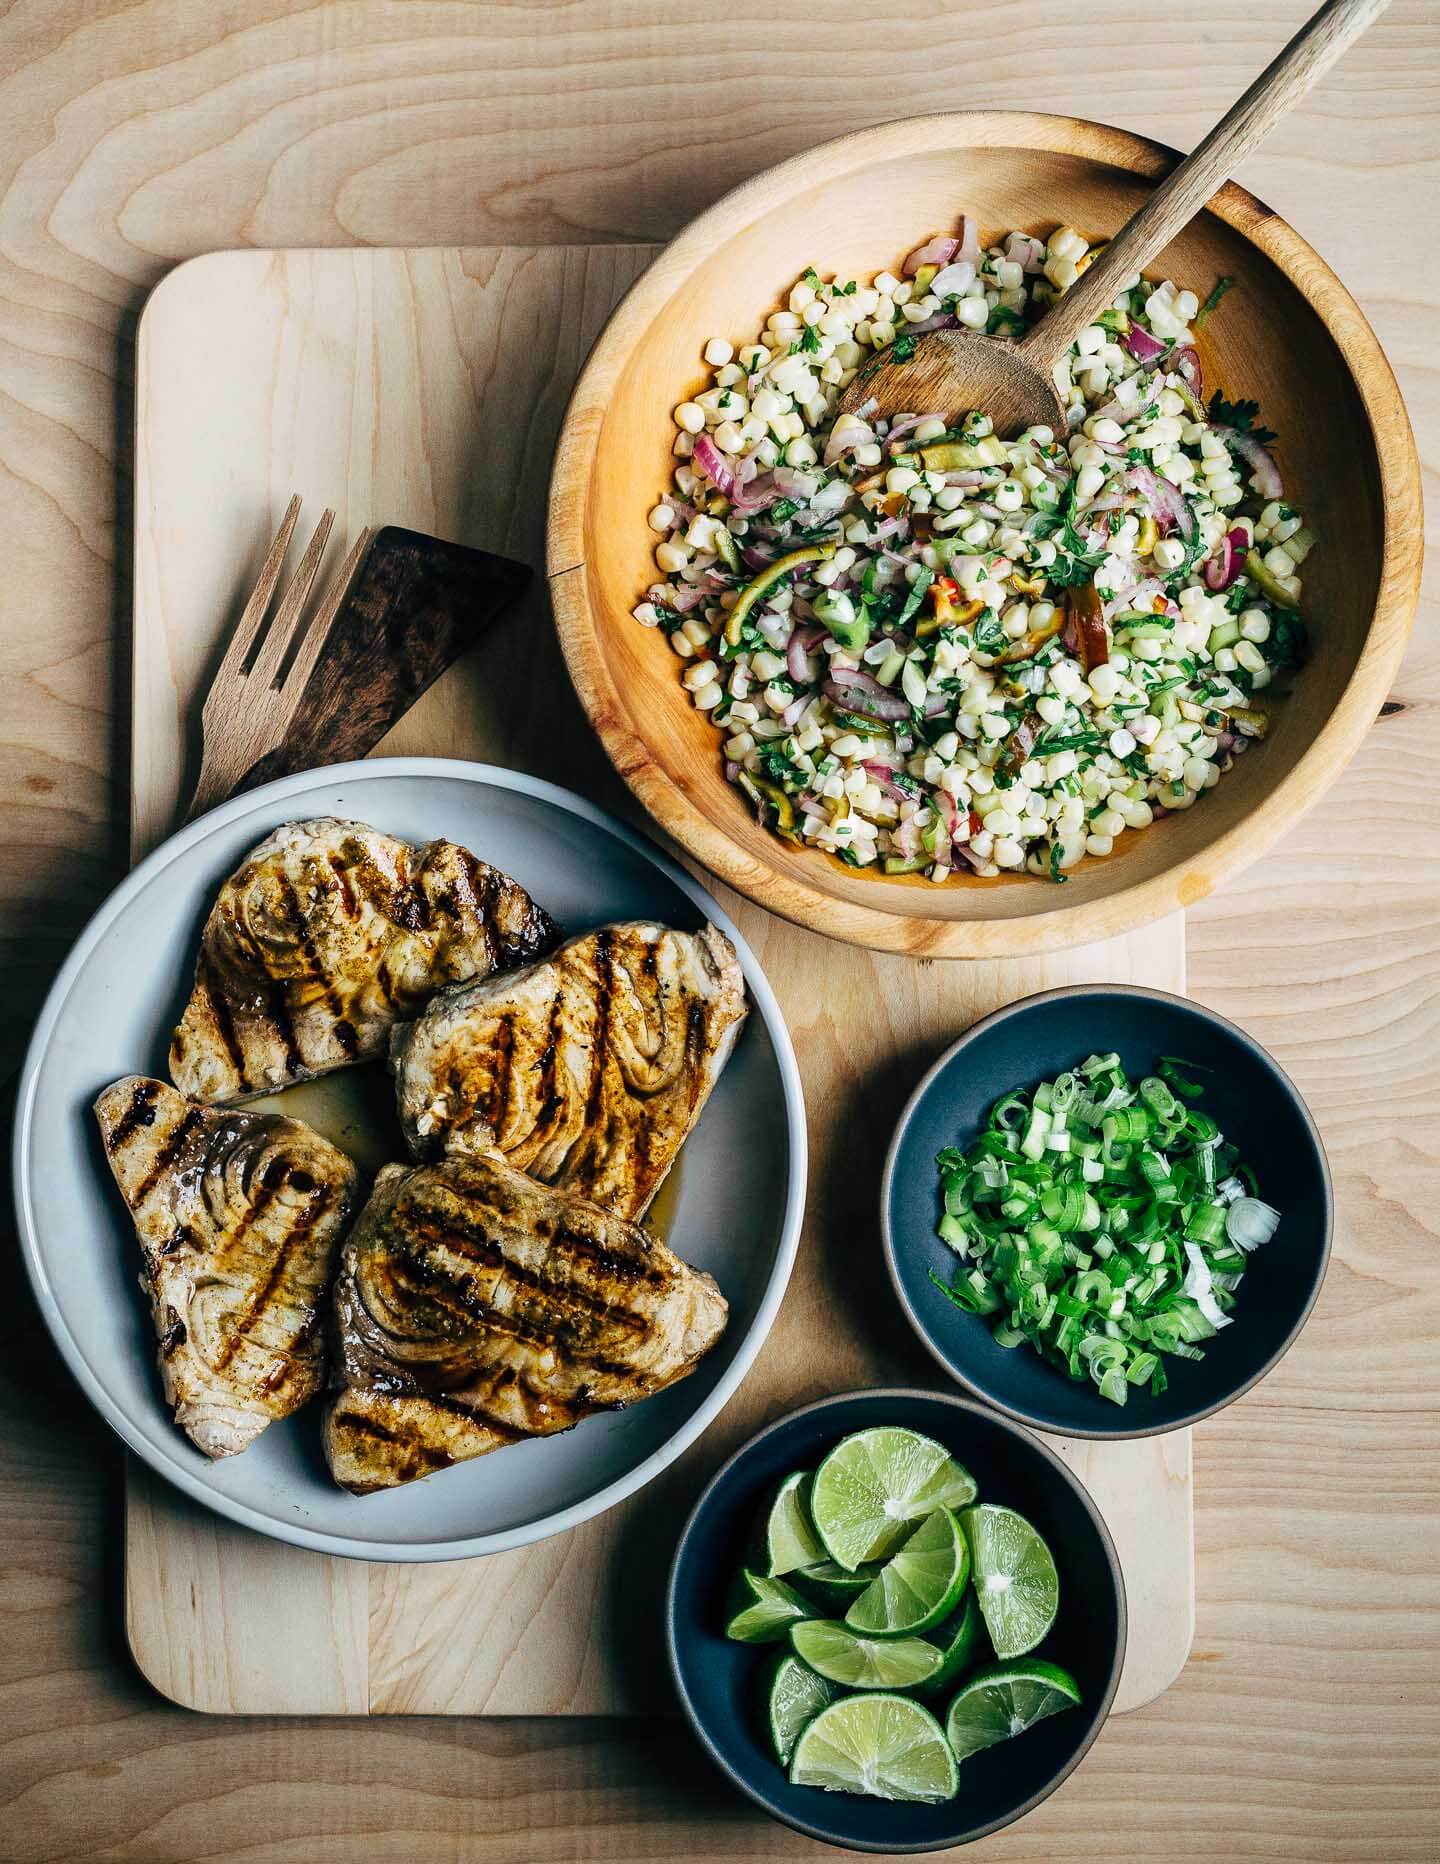 grilled swordfish steaks with herbed corn salad // brooklyn supper